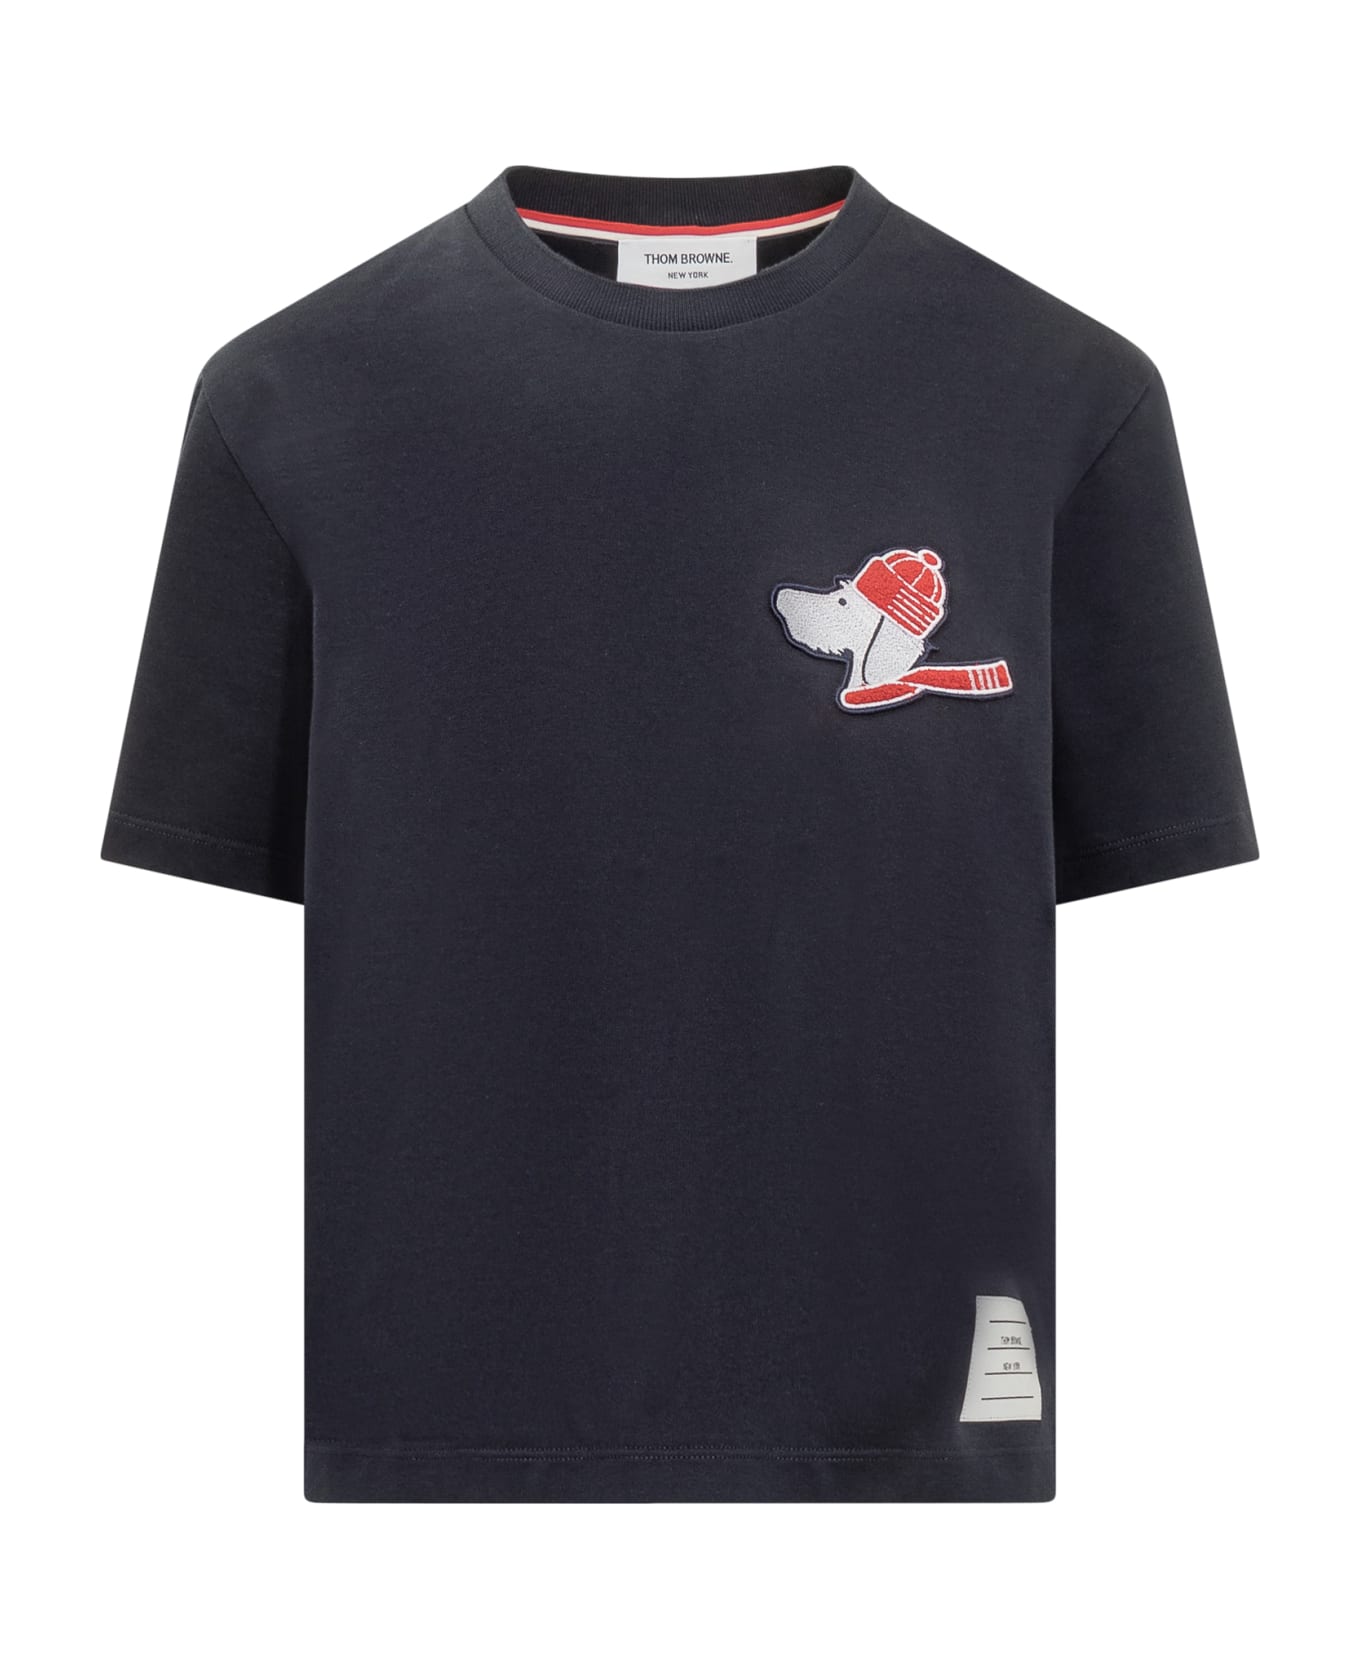 Thom Browne Hector T-shirt - NAVY Tシャツ